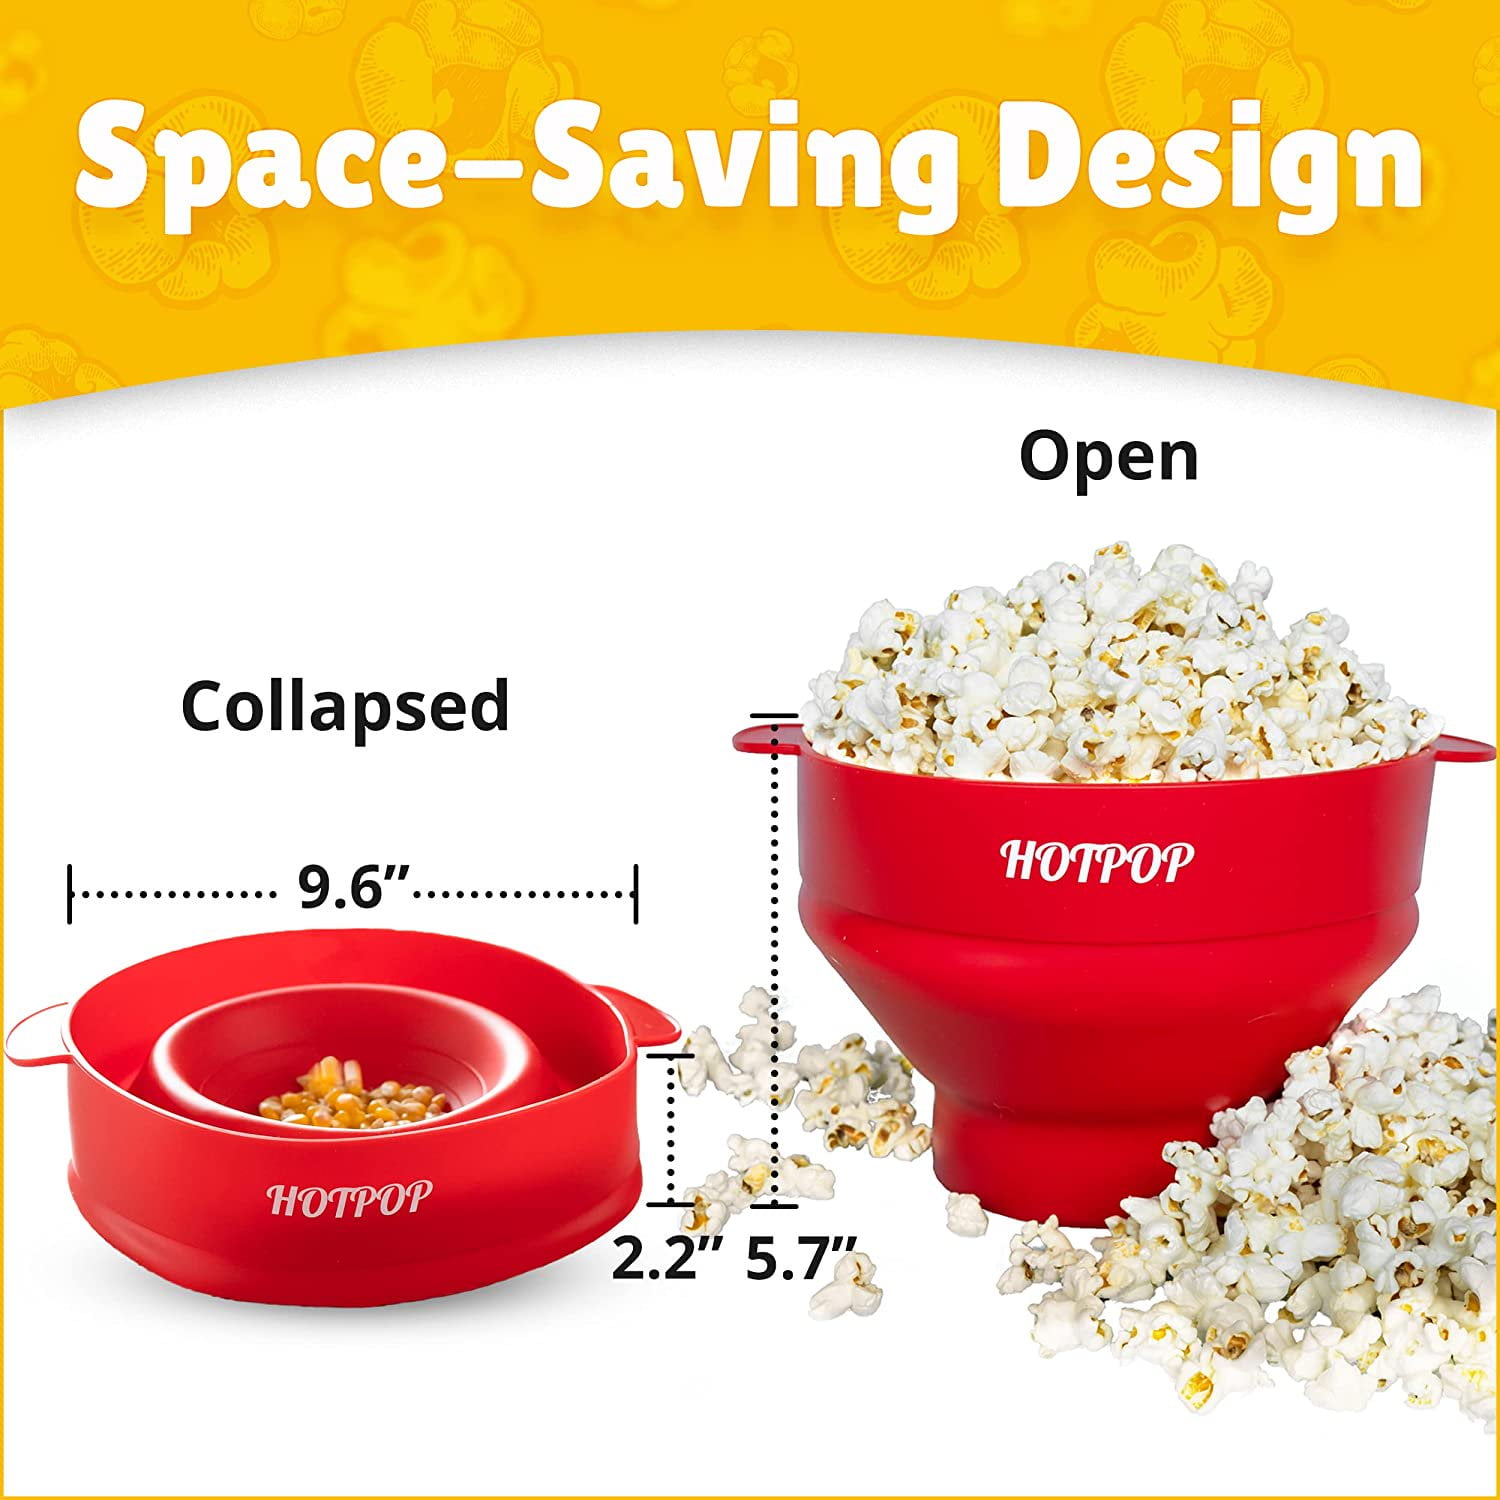  W&P Microwave Silicone Personal Popcorn Popper Maker, Red